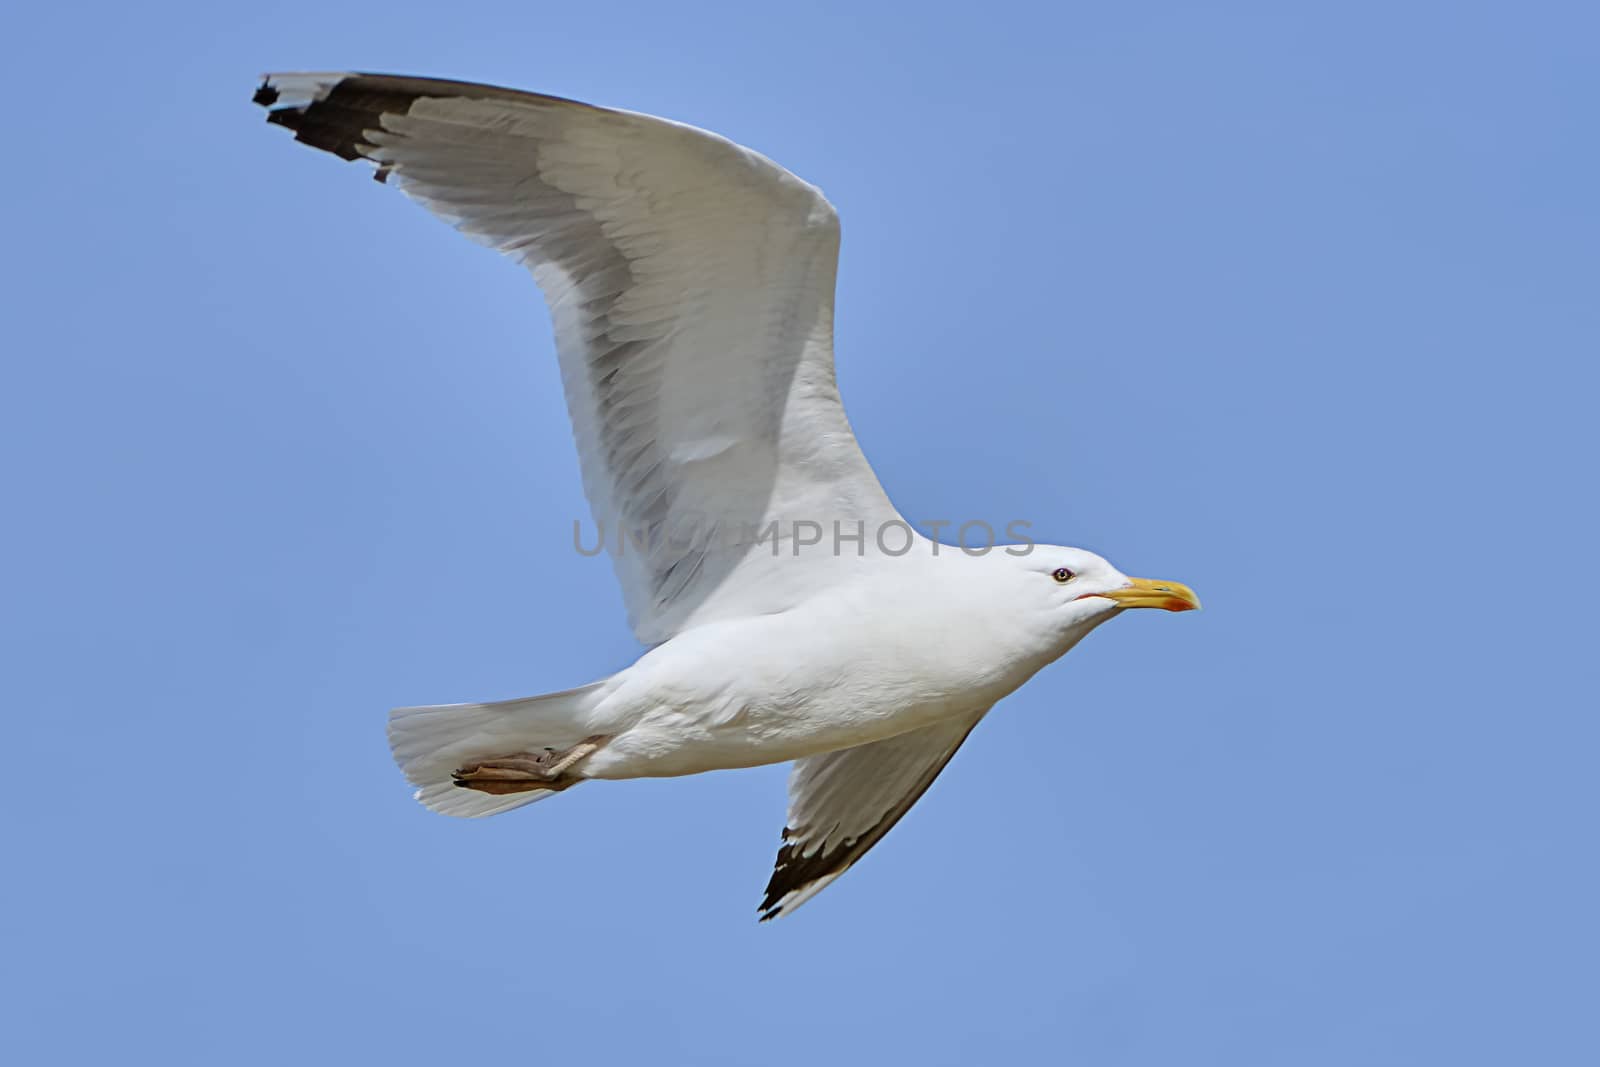 White seagull in flight against a blue sky                               